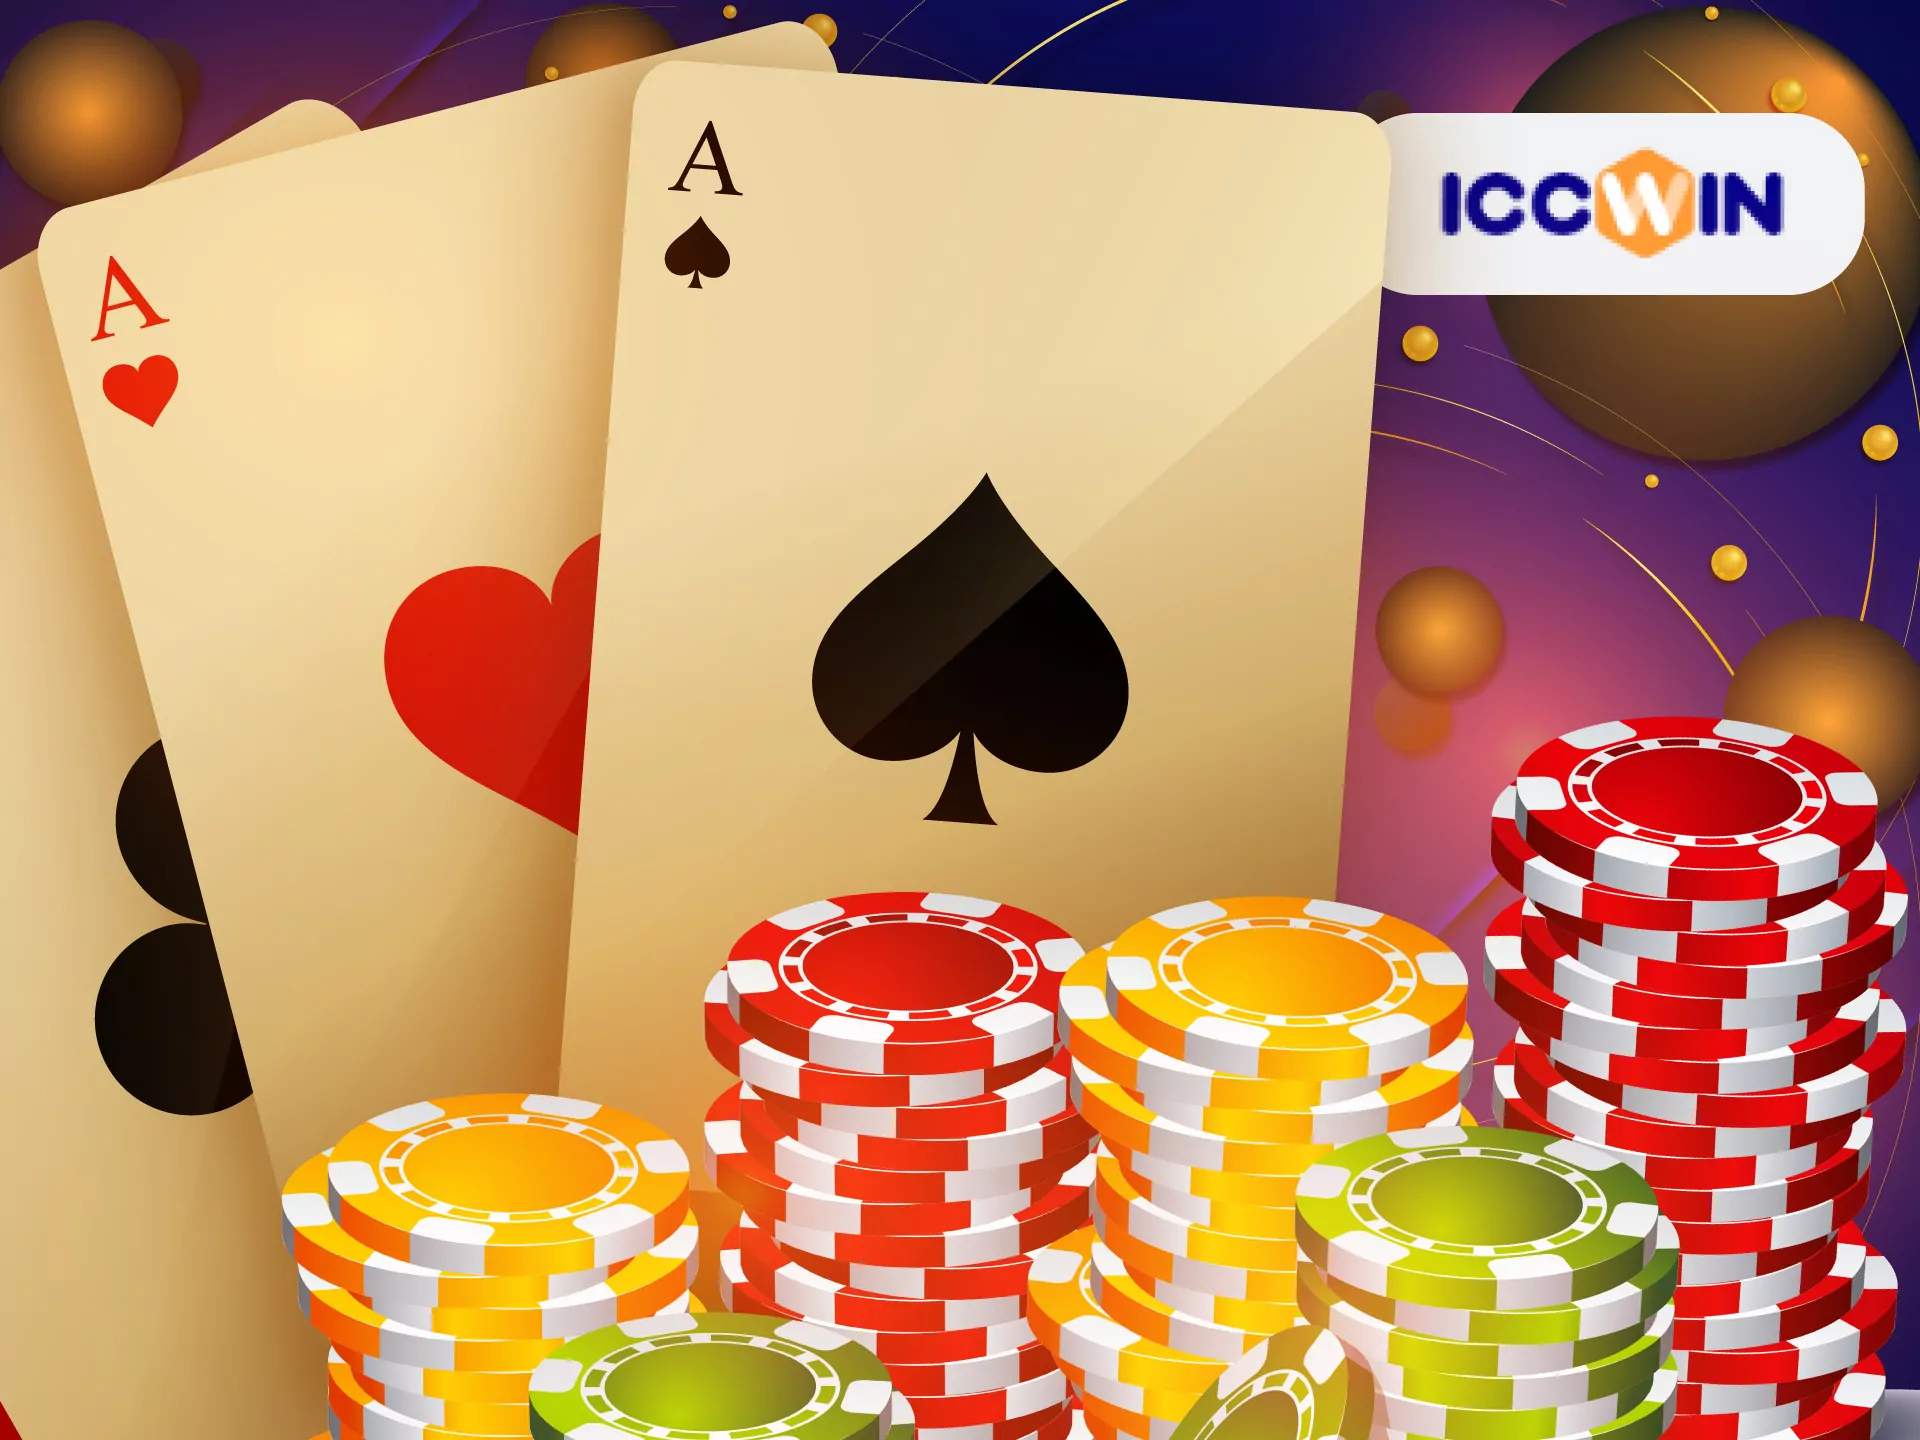 Collect cards with 21 points and win the ICCWIN blackjack game.